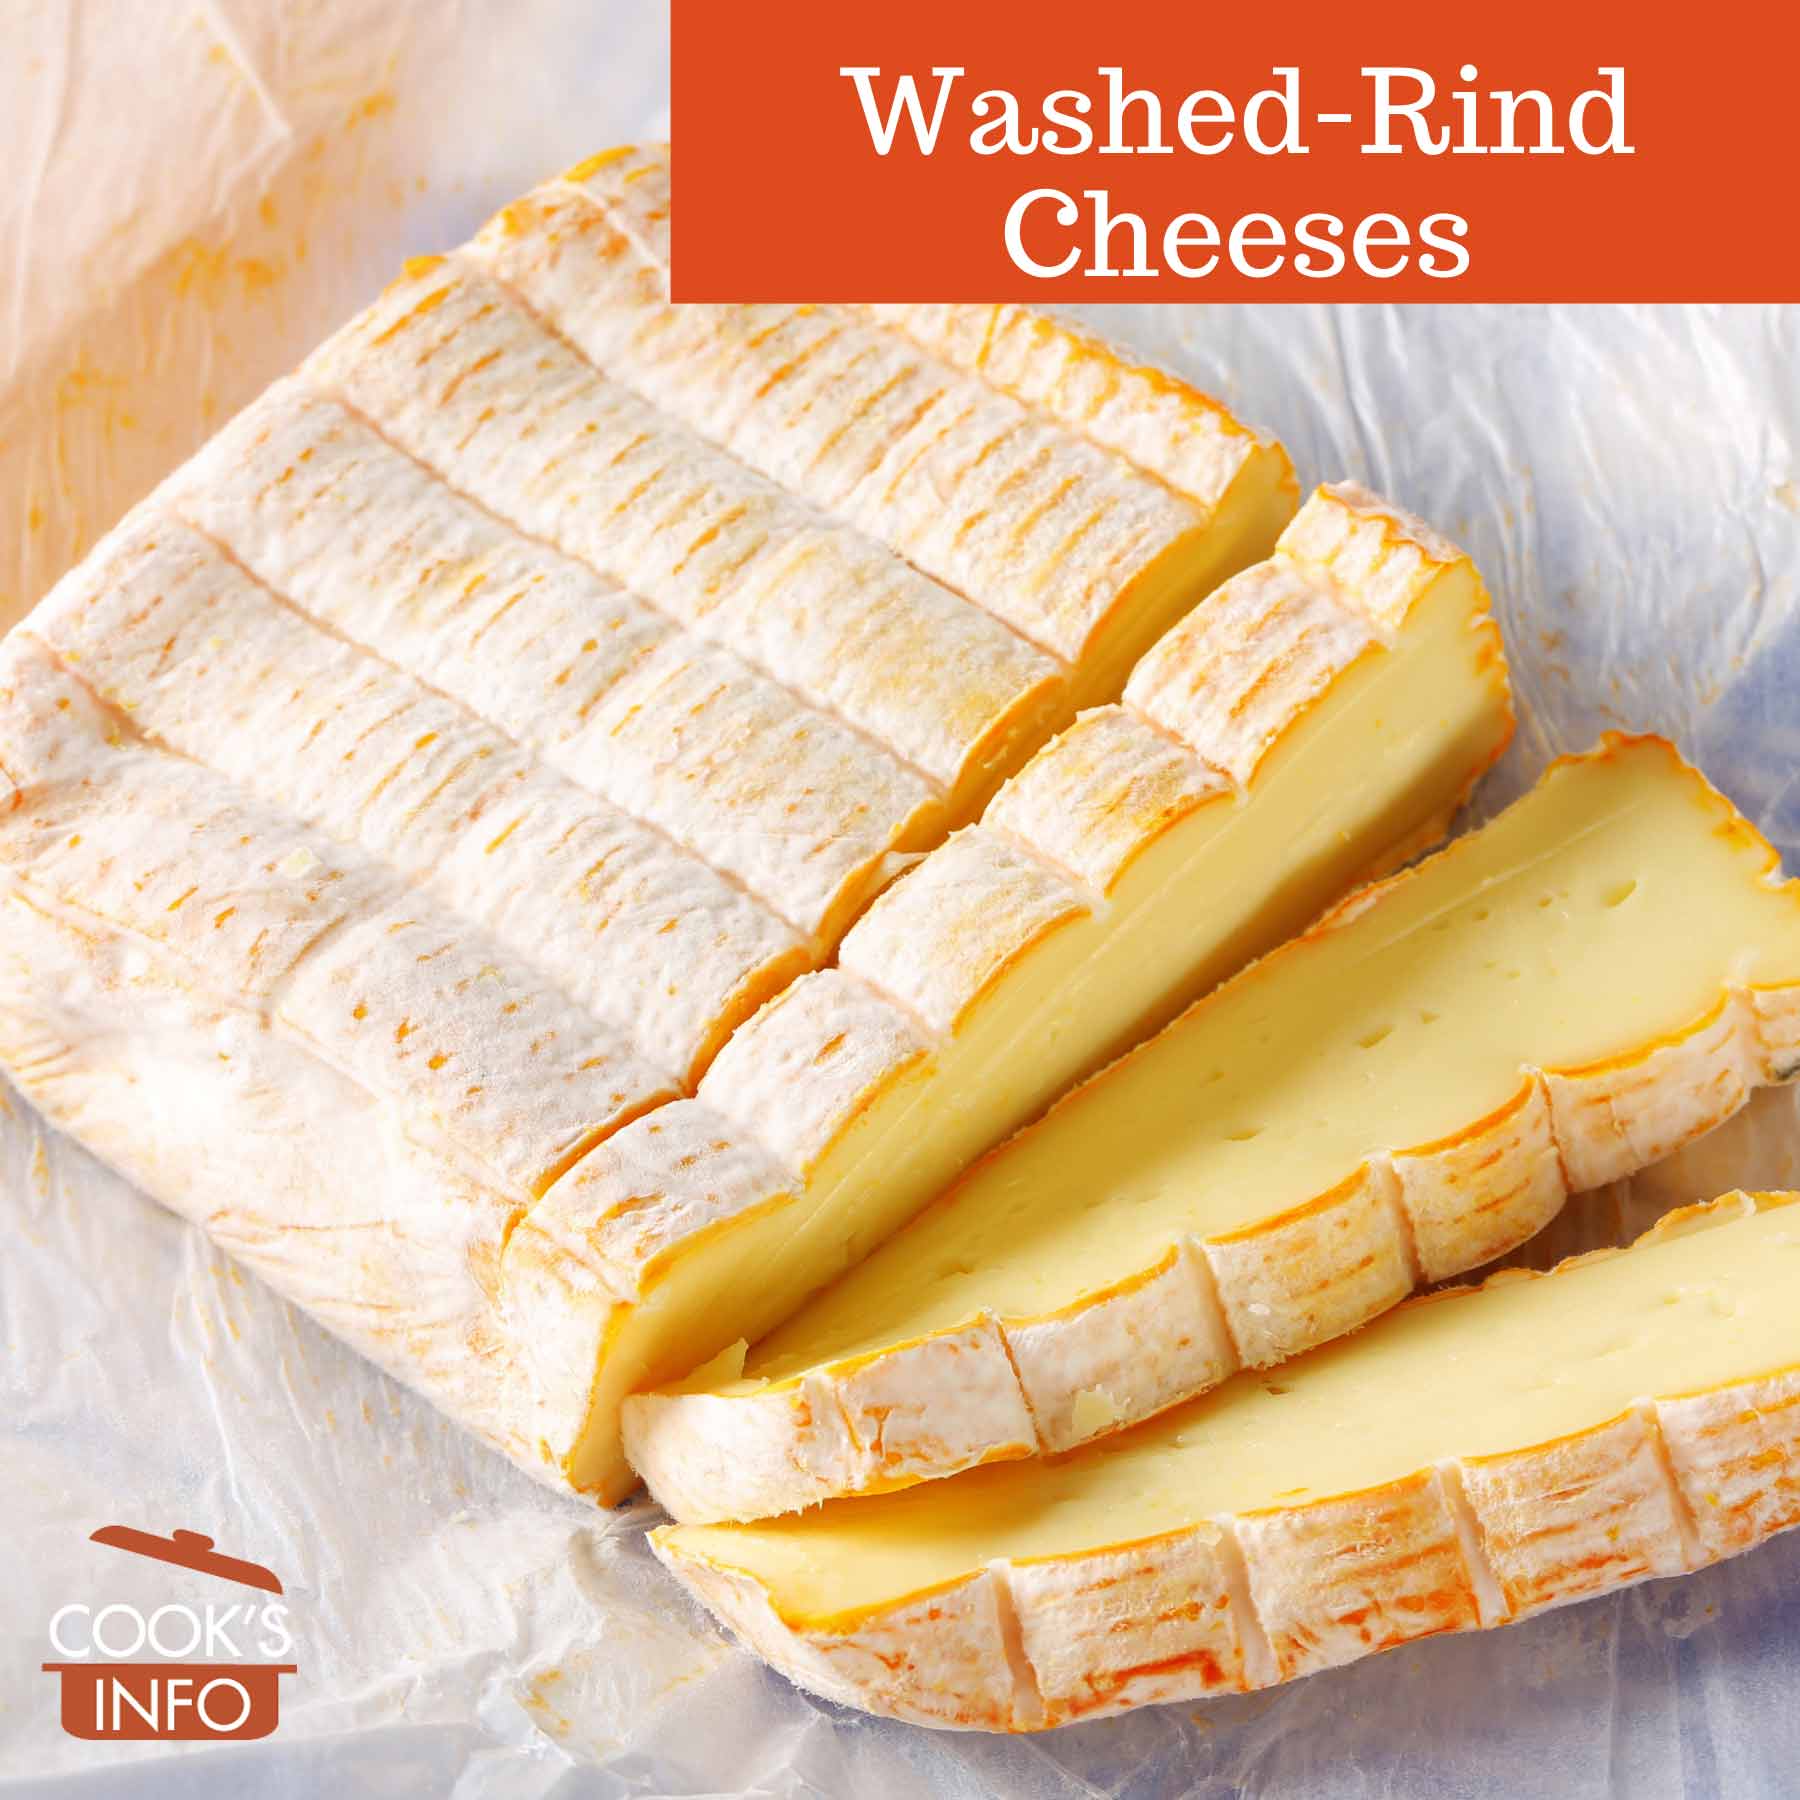 Washed-Rind Cheeses - CooksInfo